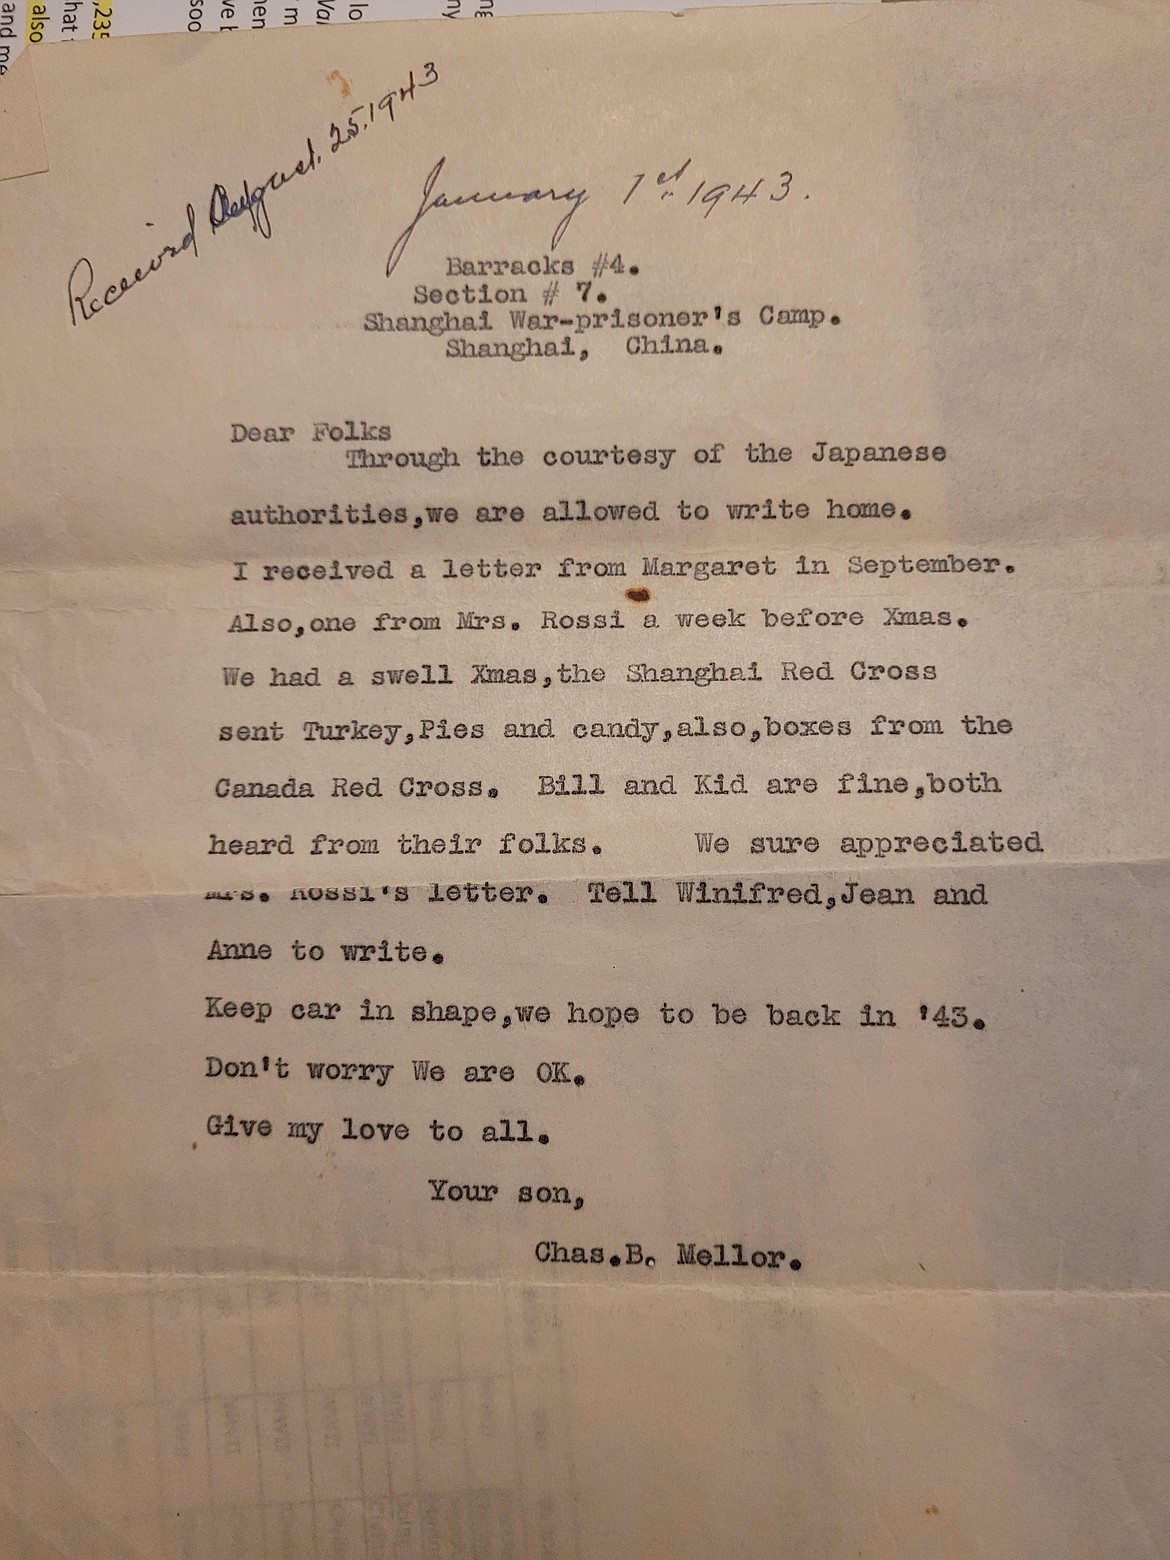 A letter written by Charles Mellor in 1943 while he was a prisoner of war in Shanghai following the Japanese takeover of Wake Island, where Mellor and two brothers, Emmett and Glenn Newell, all of small towns in Idaho, were taken captive. Their families, of North Idaho, met for the first time Tuesday.